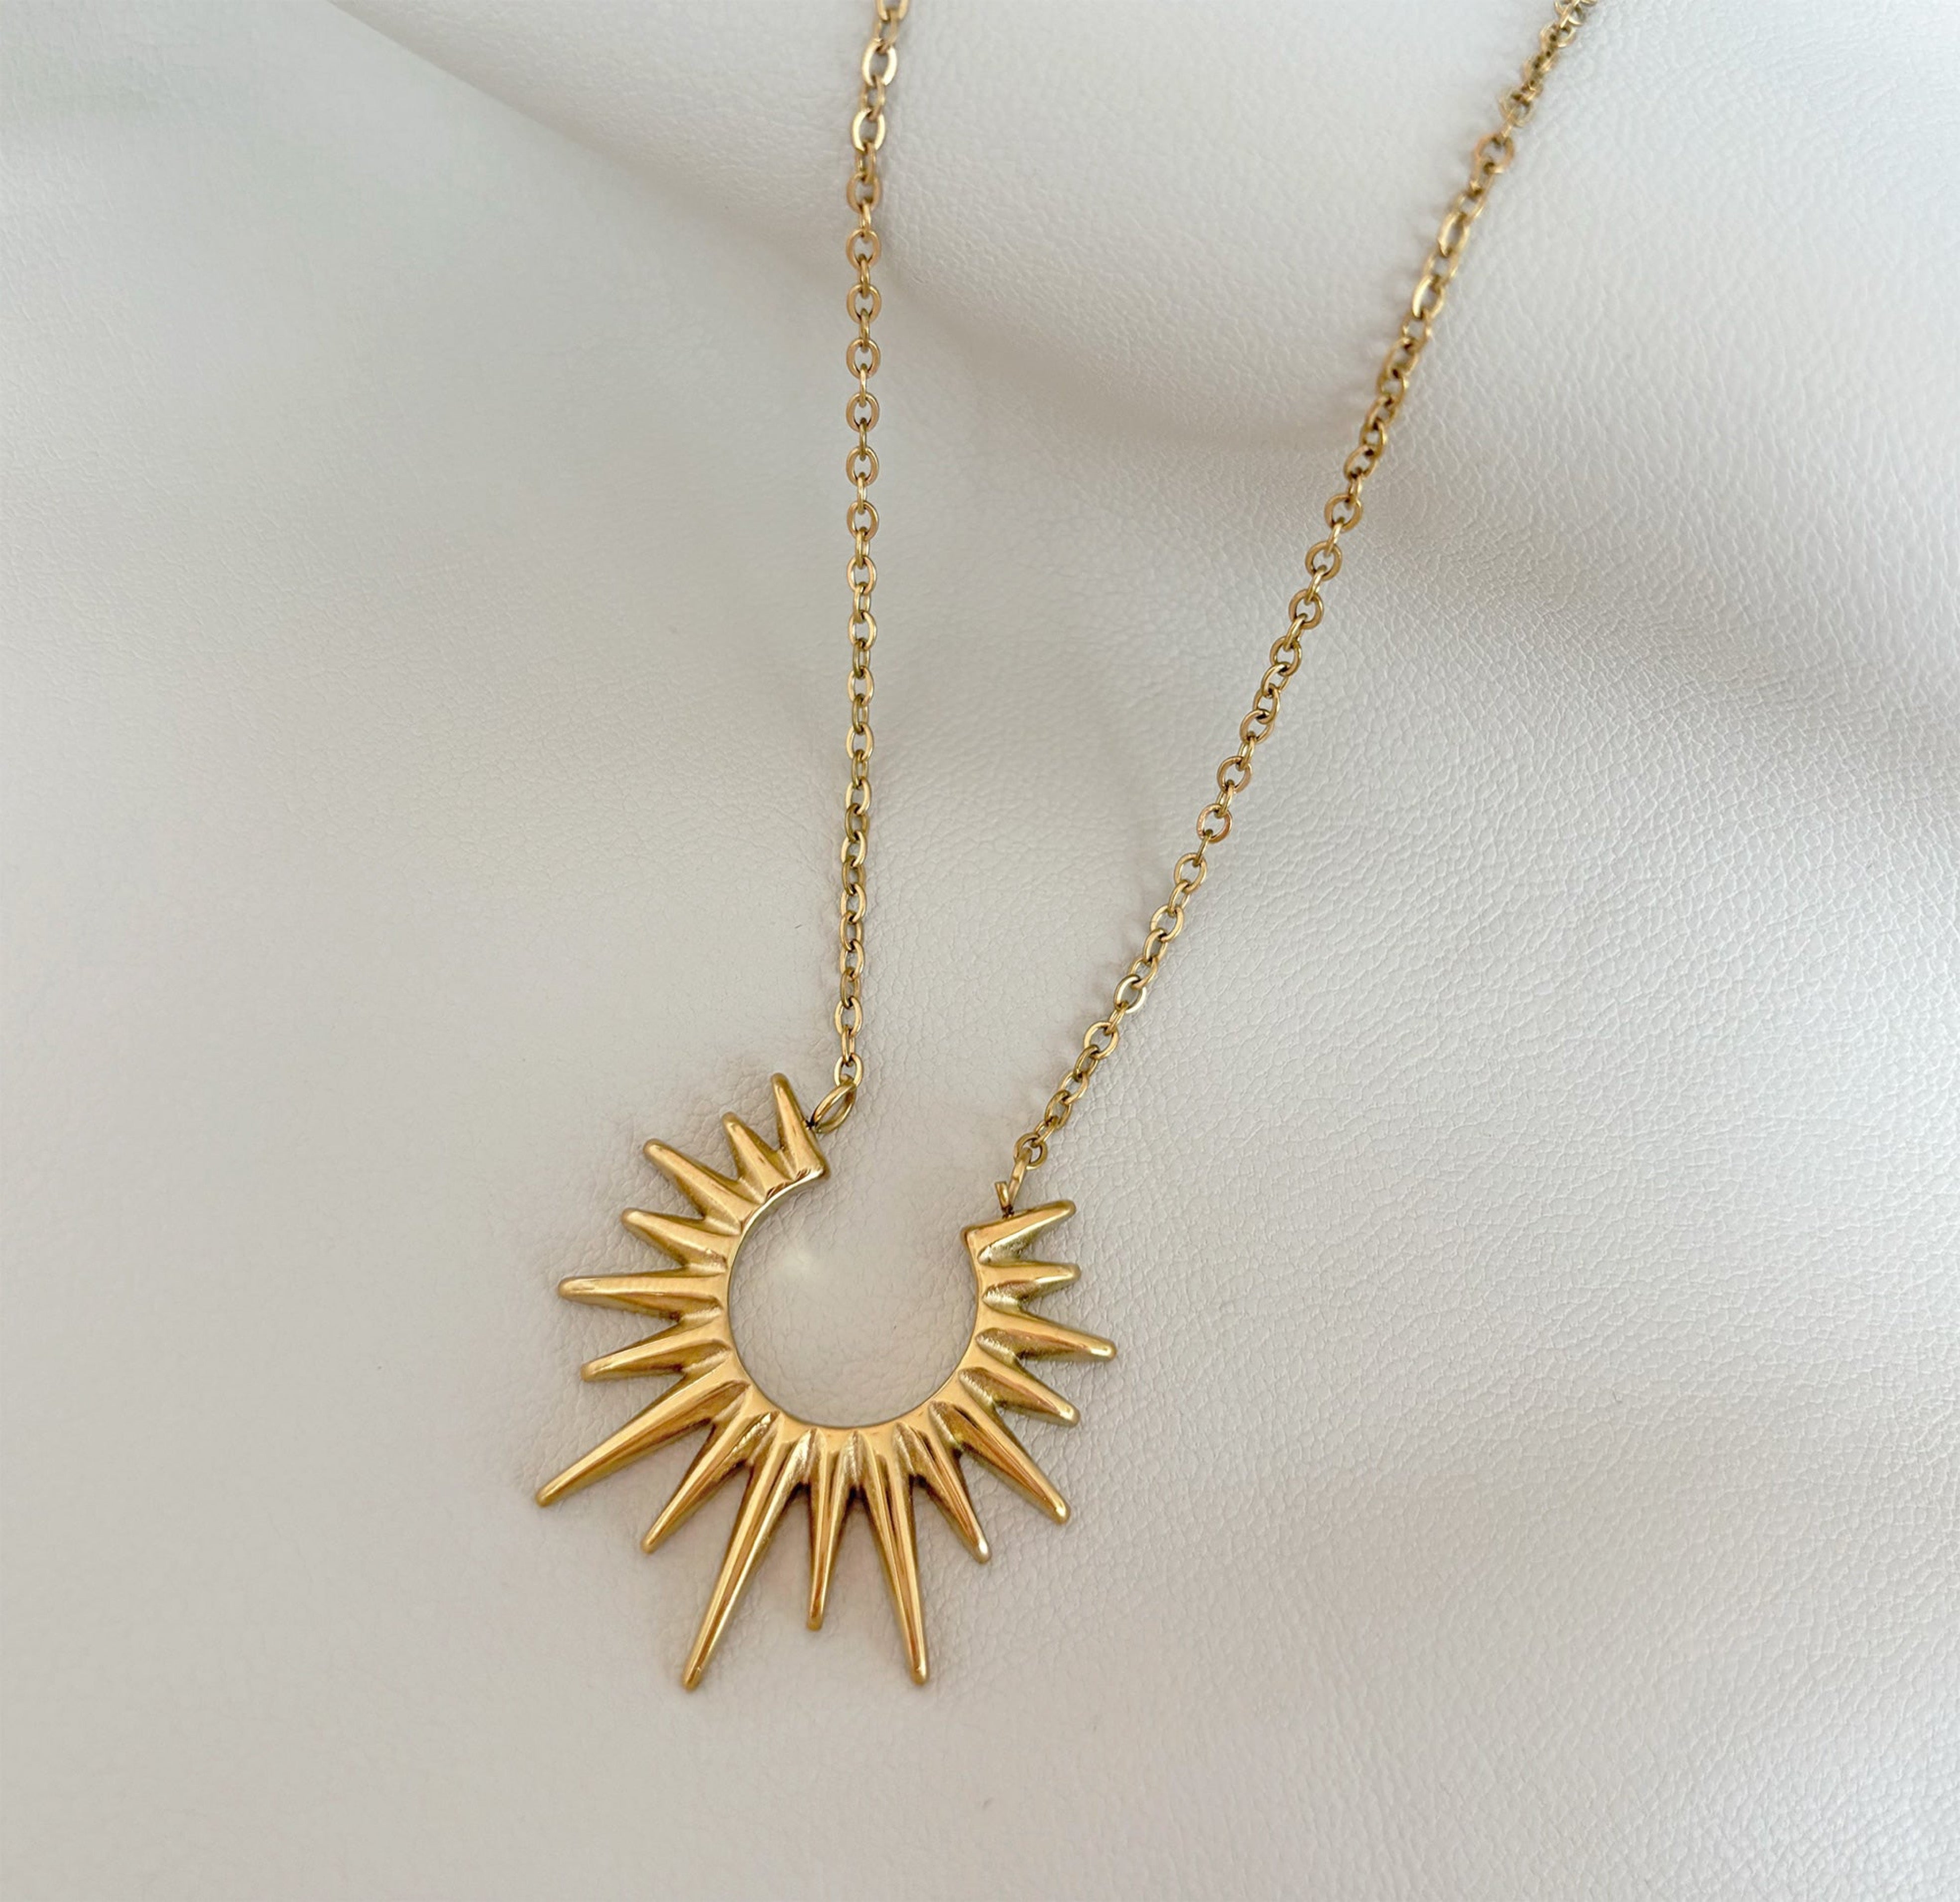 gold beaming sun pendant necklace waterproof jewelry